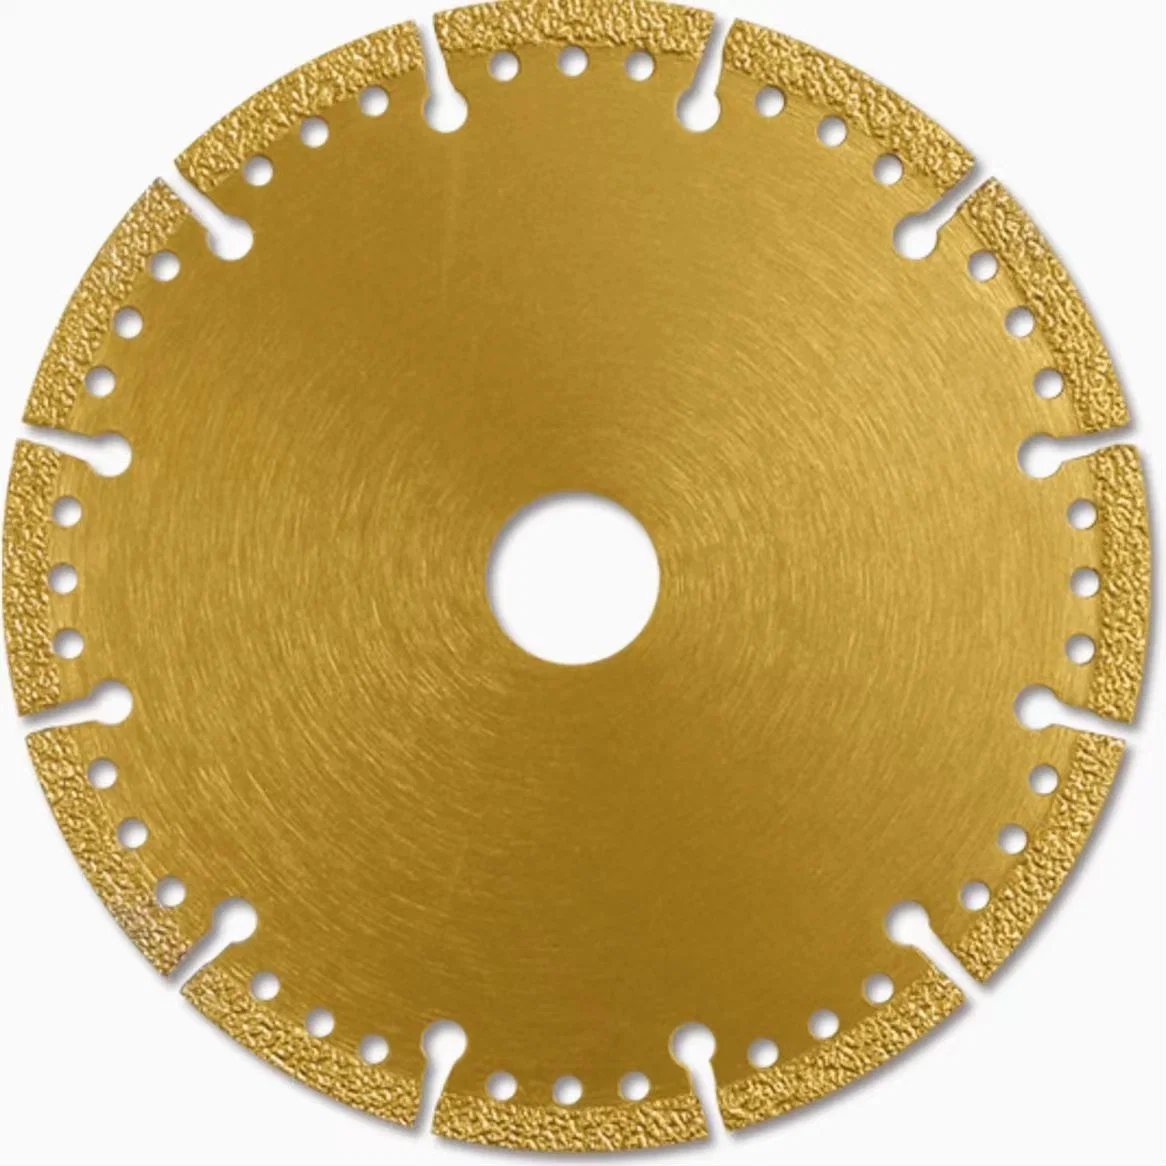 Vacuum Brazed Brazing Diamond Saw Blade Cutting Disc for Metal Stainless Steel Iron Concrete Abrasive for Angle Grinder Hand Tools